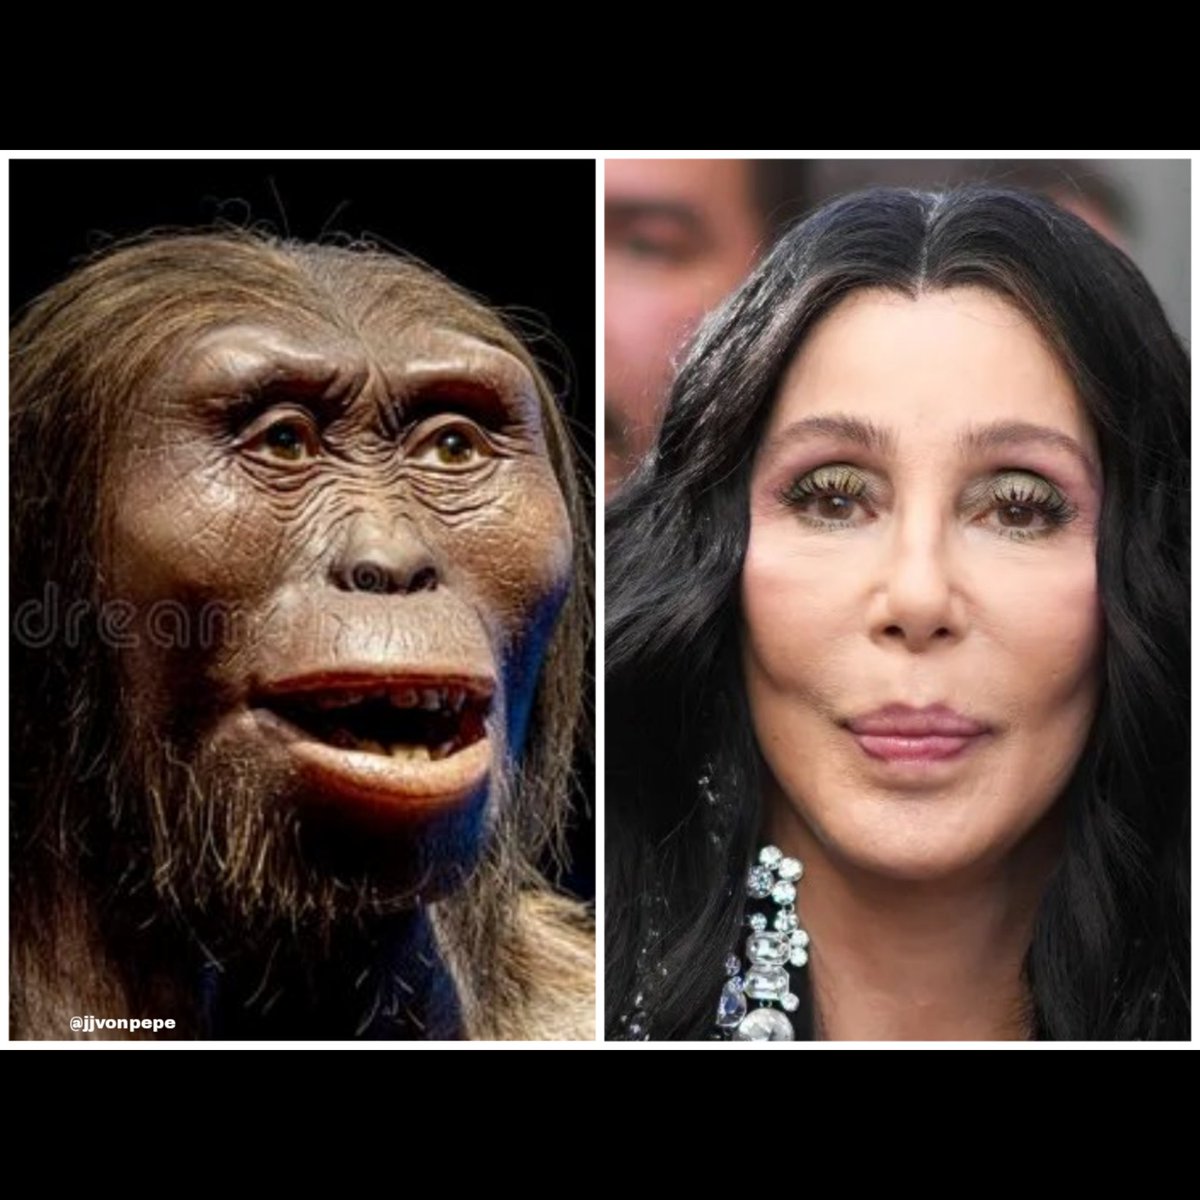 Cher, when Trump is re-elected, please keep your promise and leave the country. We already have too many Neanderthals here.

#Cher @cher #Hollywood #HollywoodIsDead #music #musicindustry #popmusic #Trump2024 #MAGA #actress